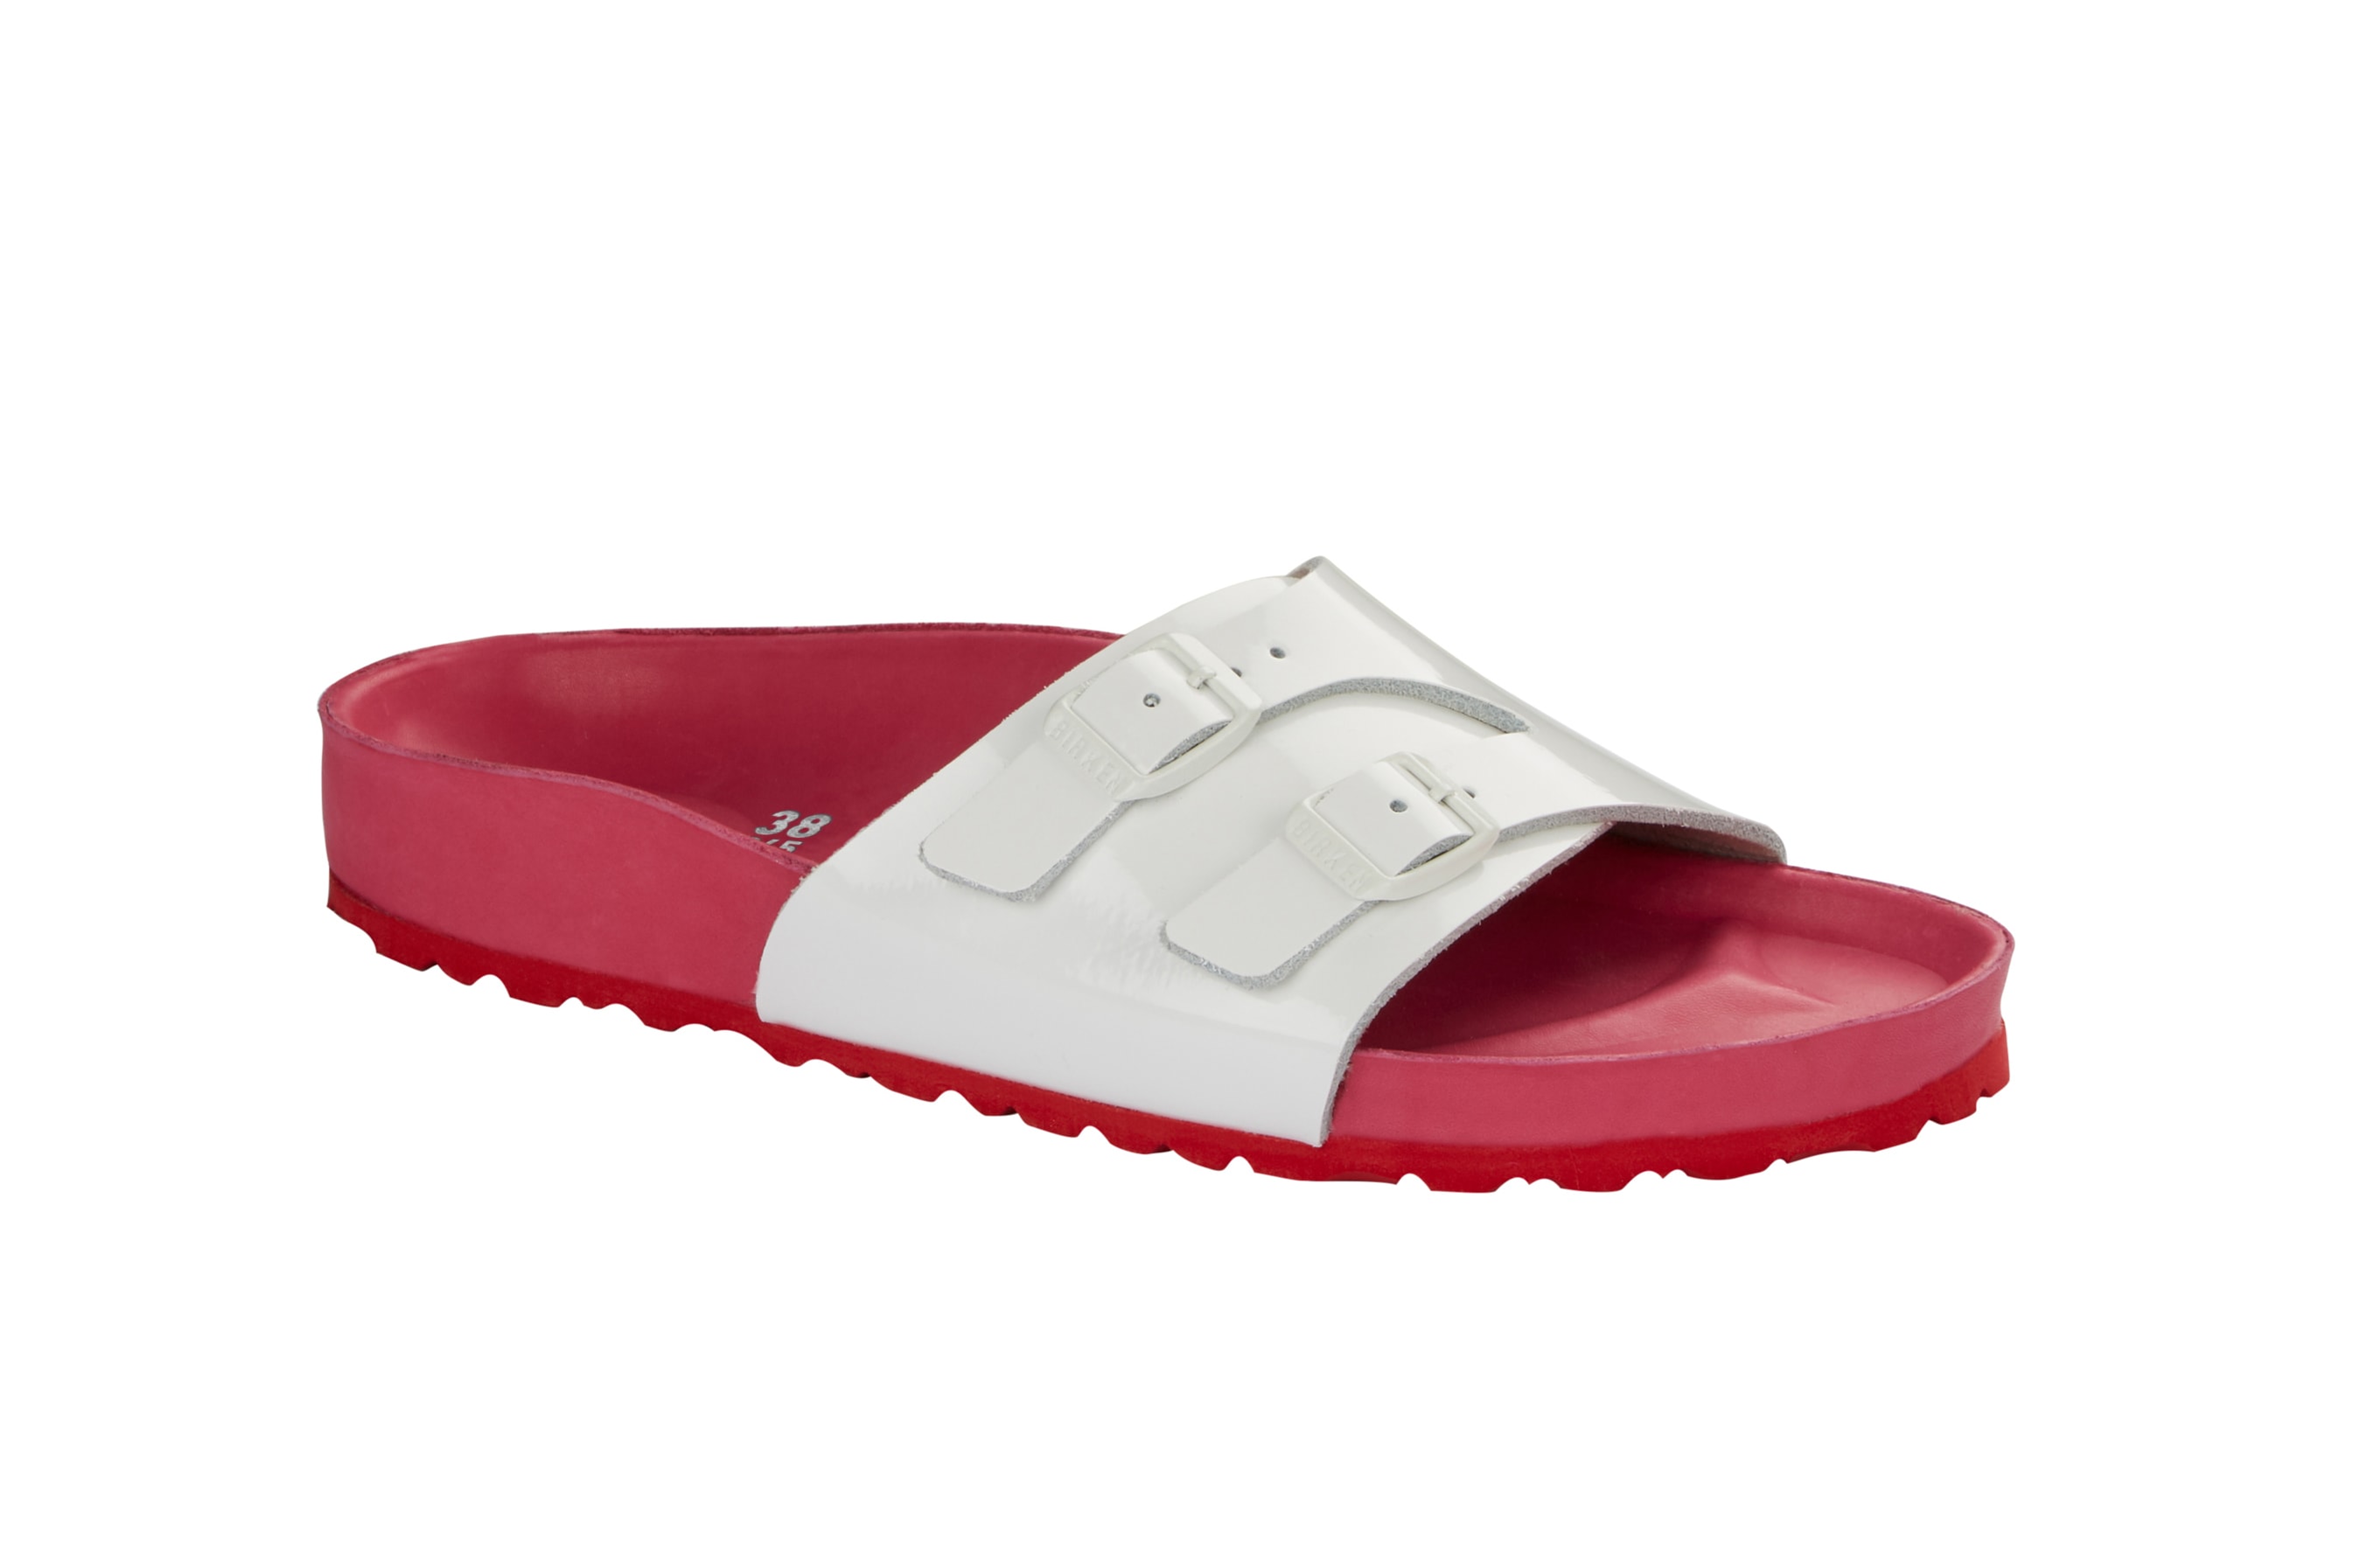 Birkenstock Limited Edition Sweetheart Capsule Collection Sandals Red Pink White Valentines Day